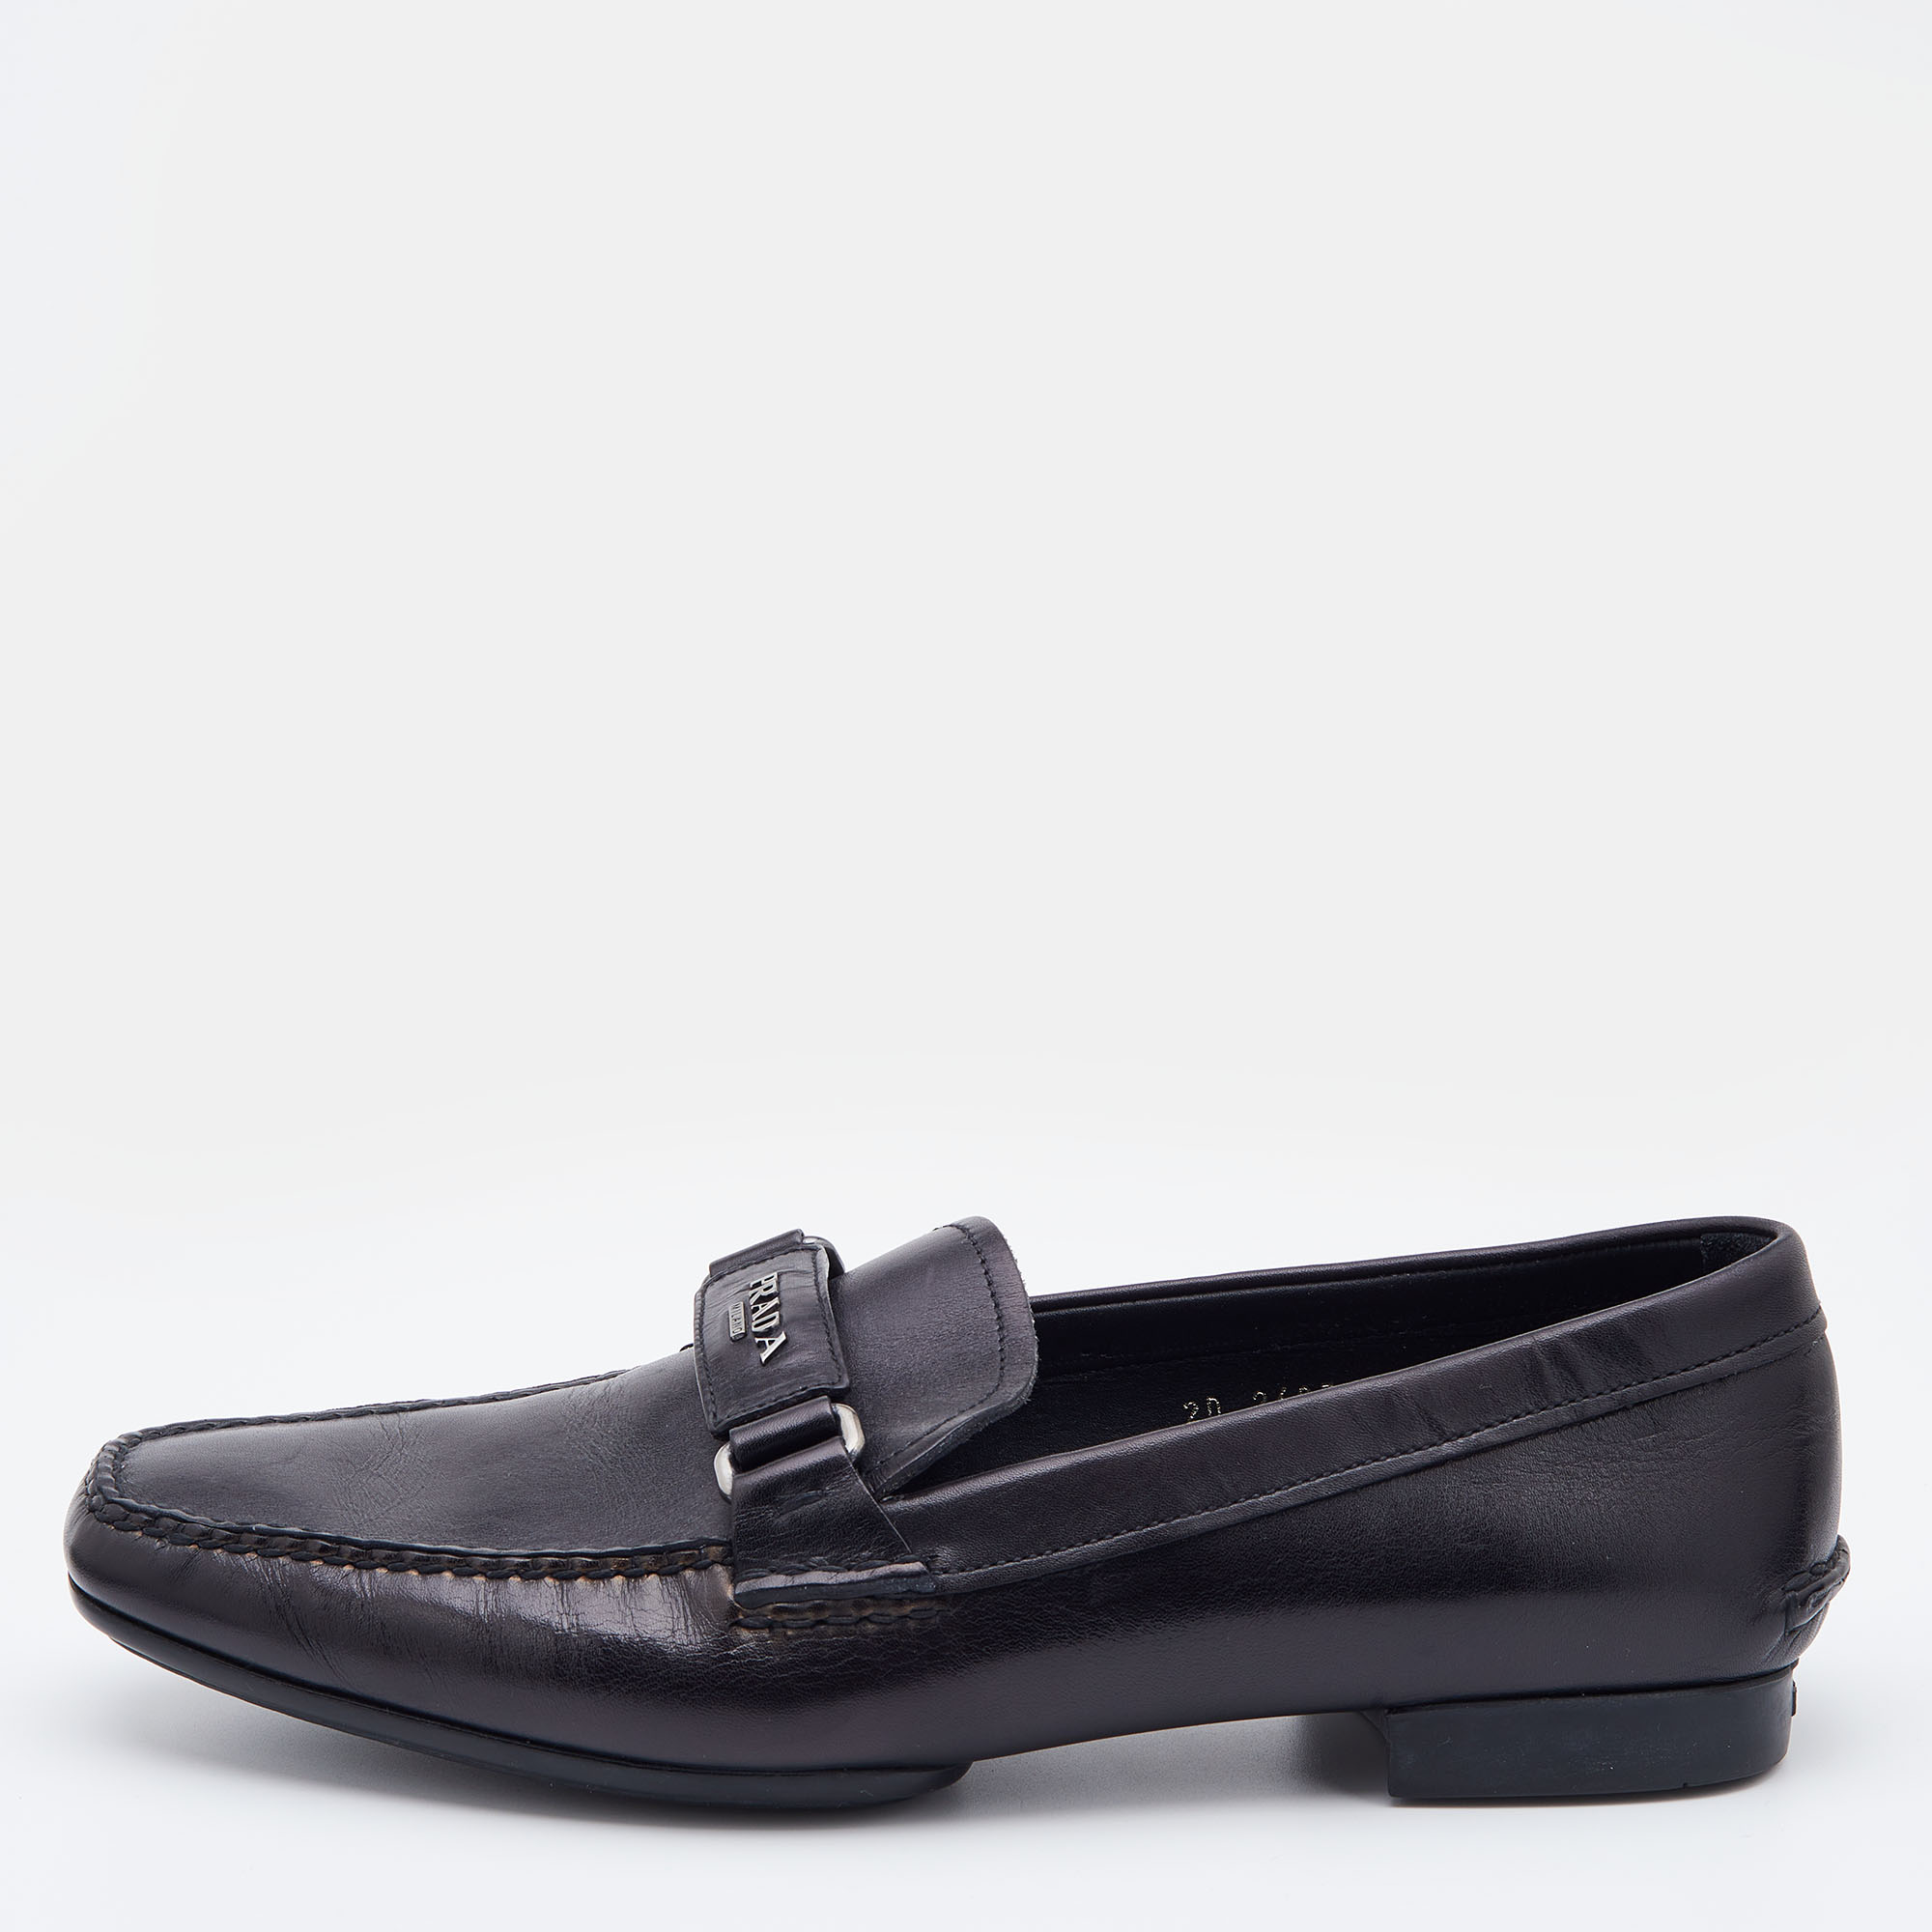 Pre-owned Prada Black Leather Slip On Loafers Size 41